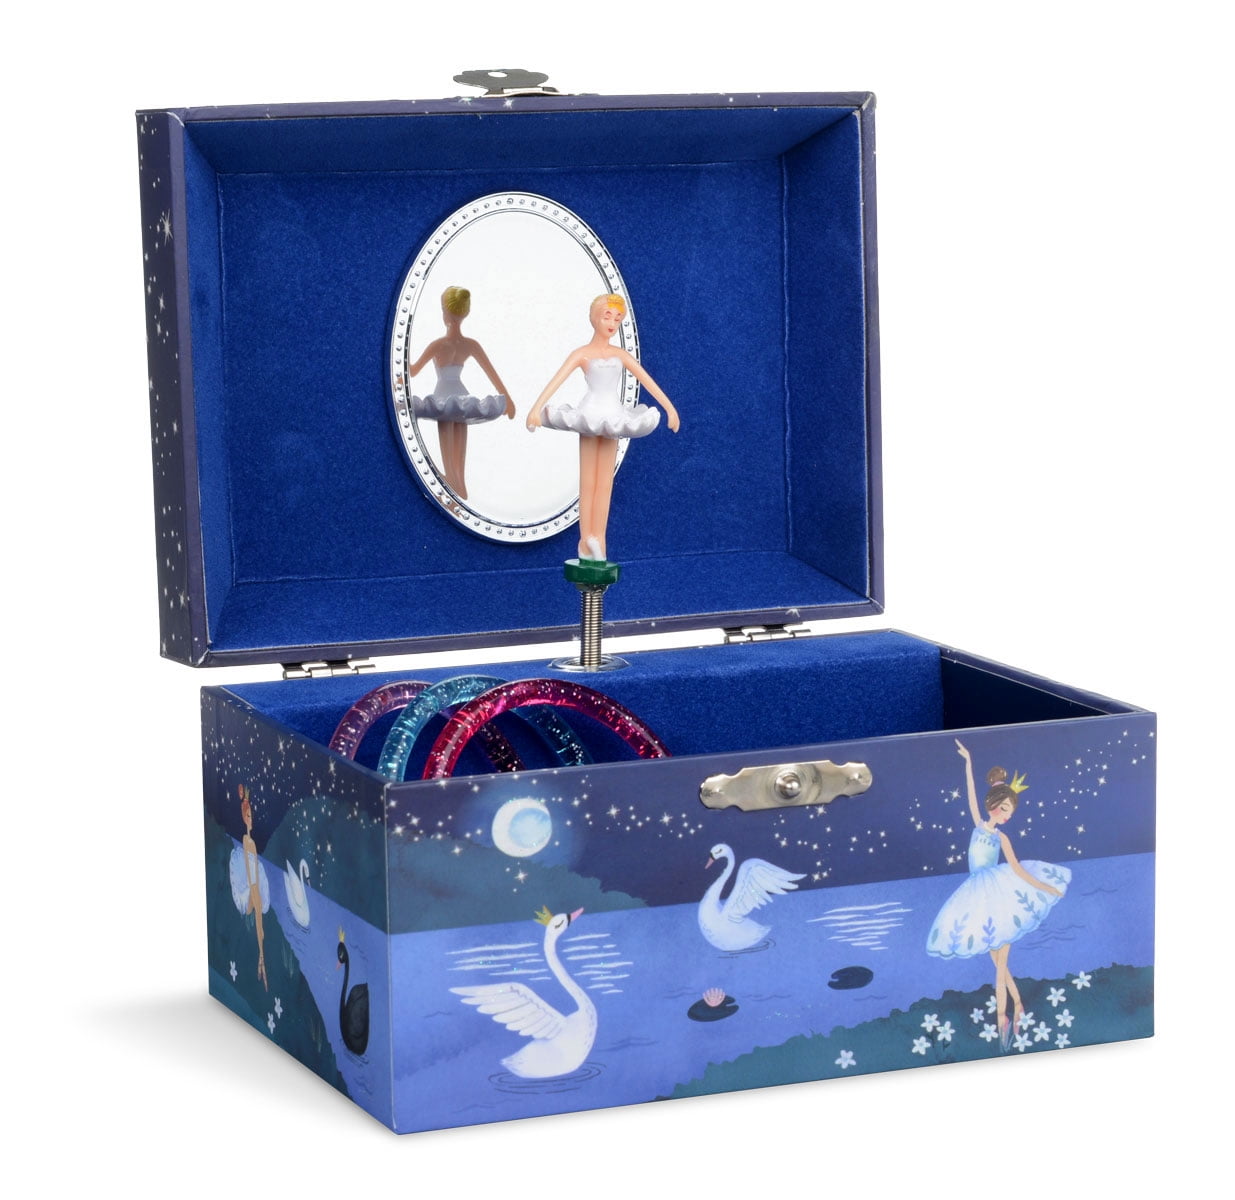 Swan Lake Tune JewelKeeper Girls Musical Jewelry Storage Box with Twirling Fairy Blue and White Star Deisgn